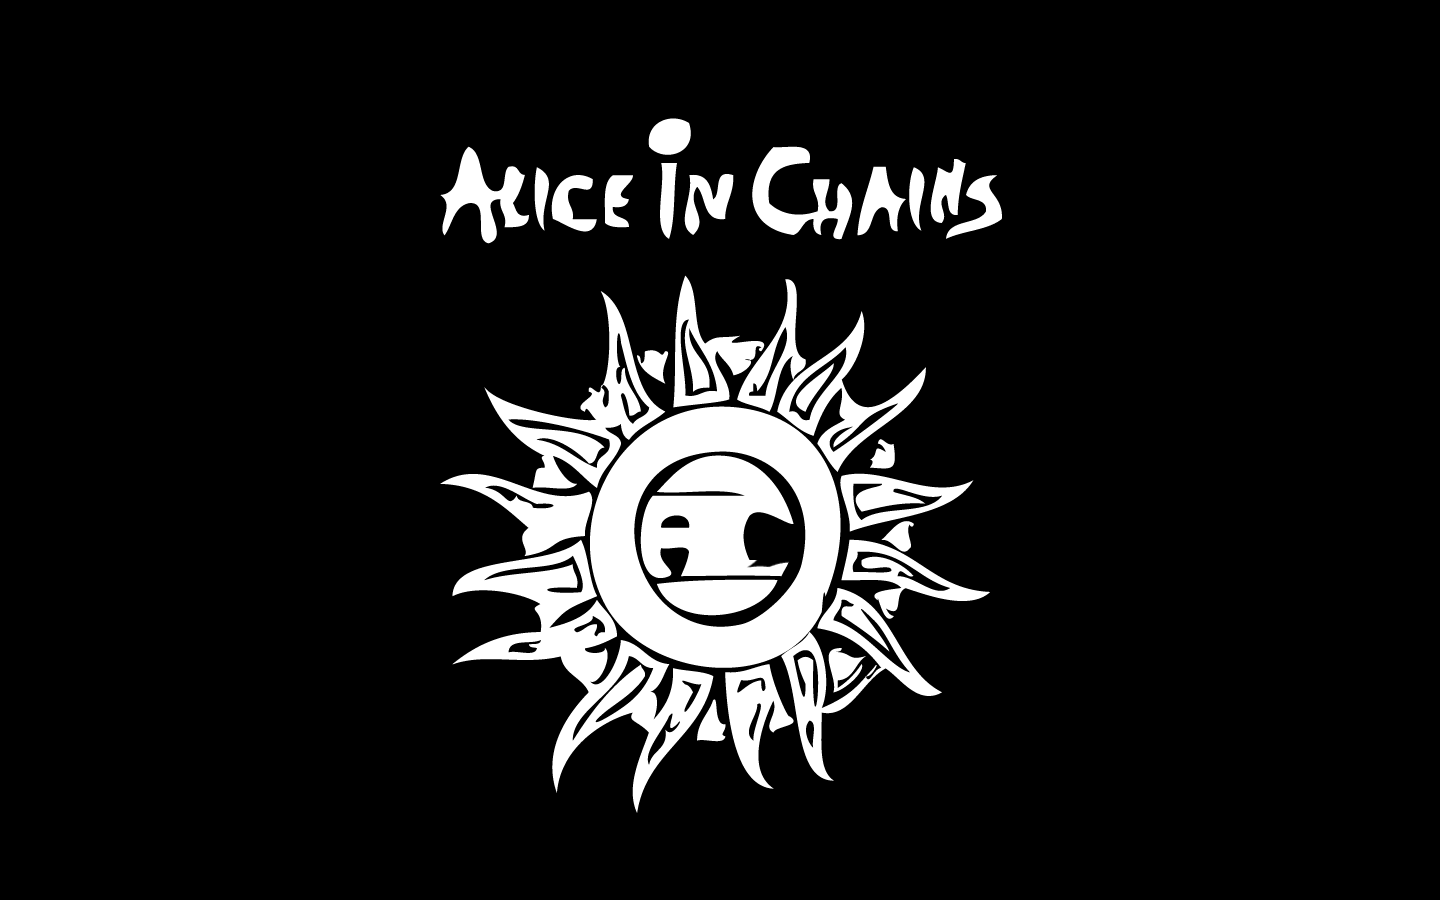 Alice in chains wallpapers.